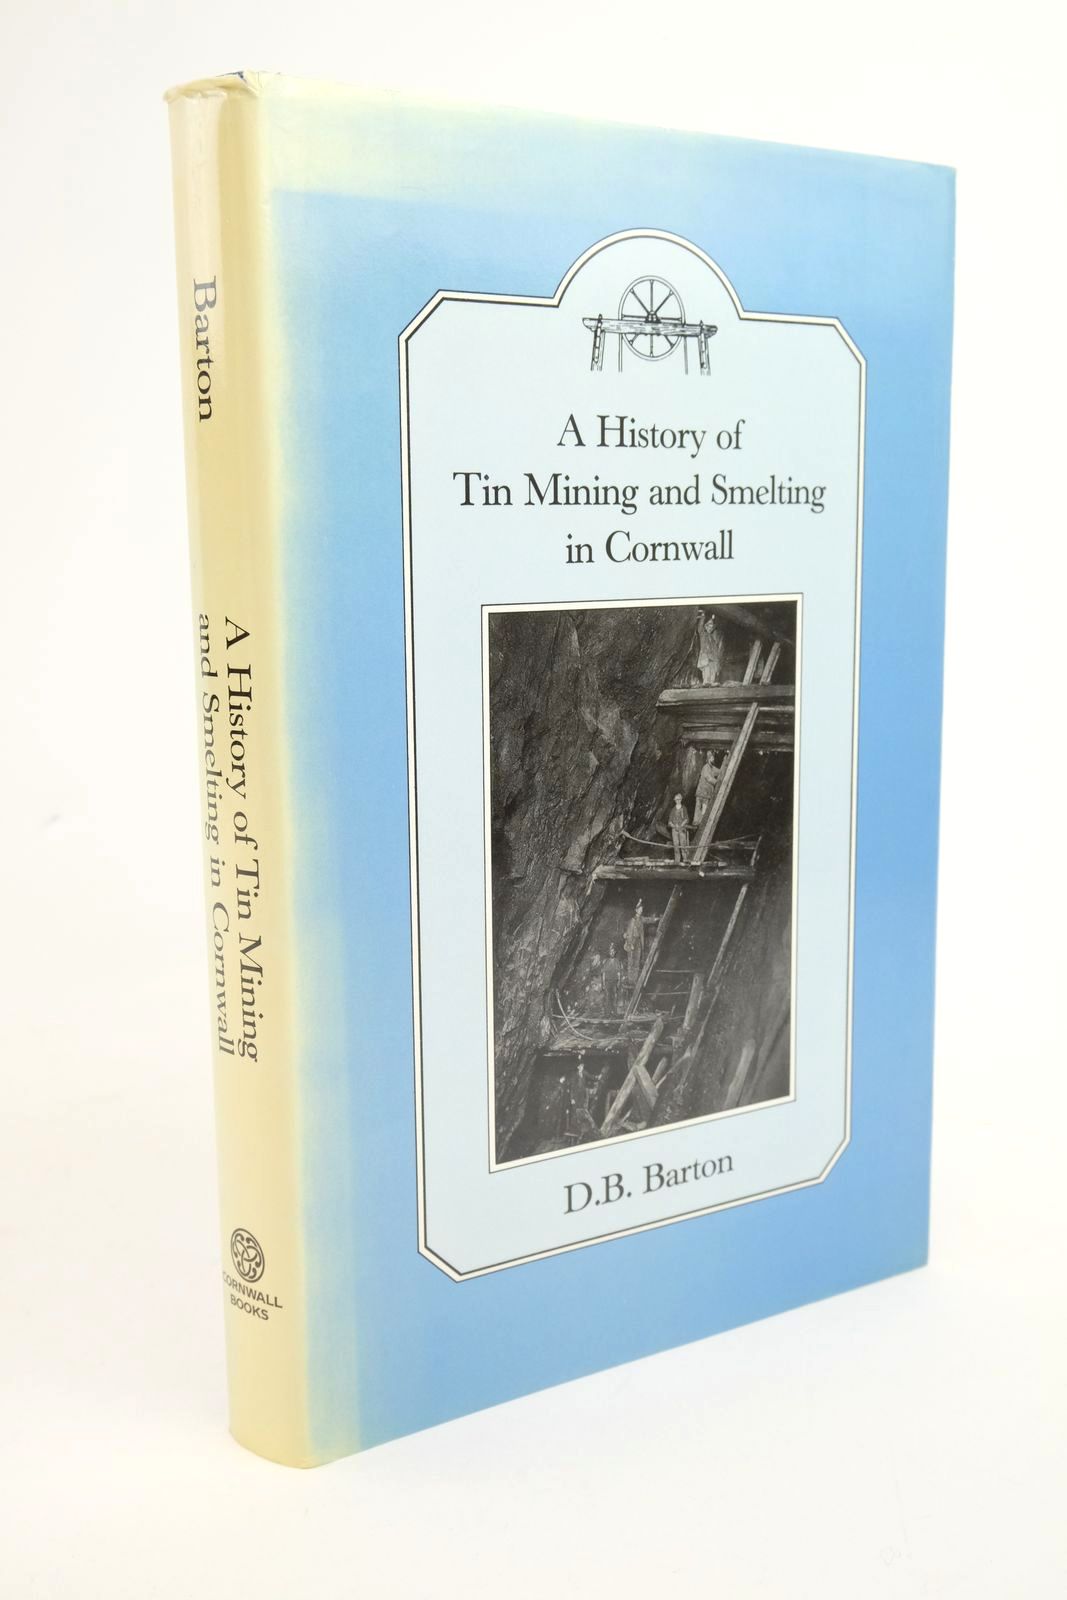 Photo of A HISTORY OF TIN MINING AND SMELTING IN CORNWALL written by Barton, D.B. published by Cornwall Books (STOCK CODE: 1322440)  for sale by Stella & Rose's Books